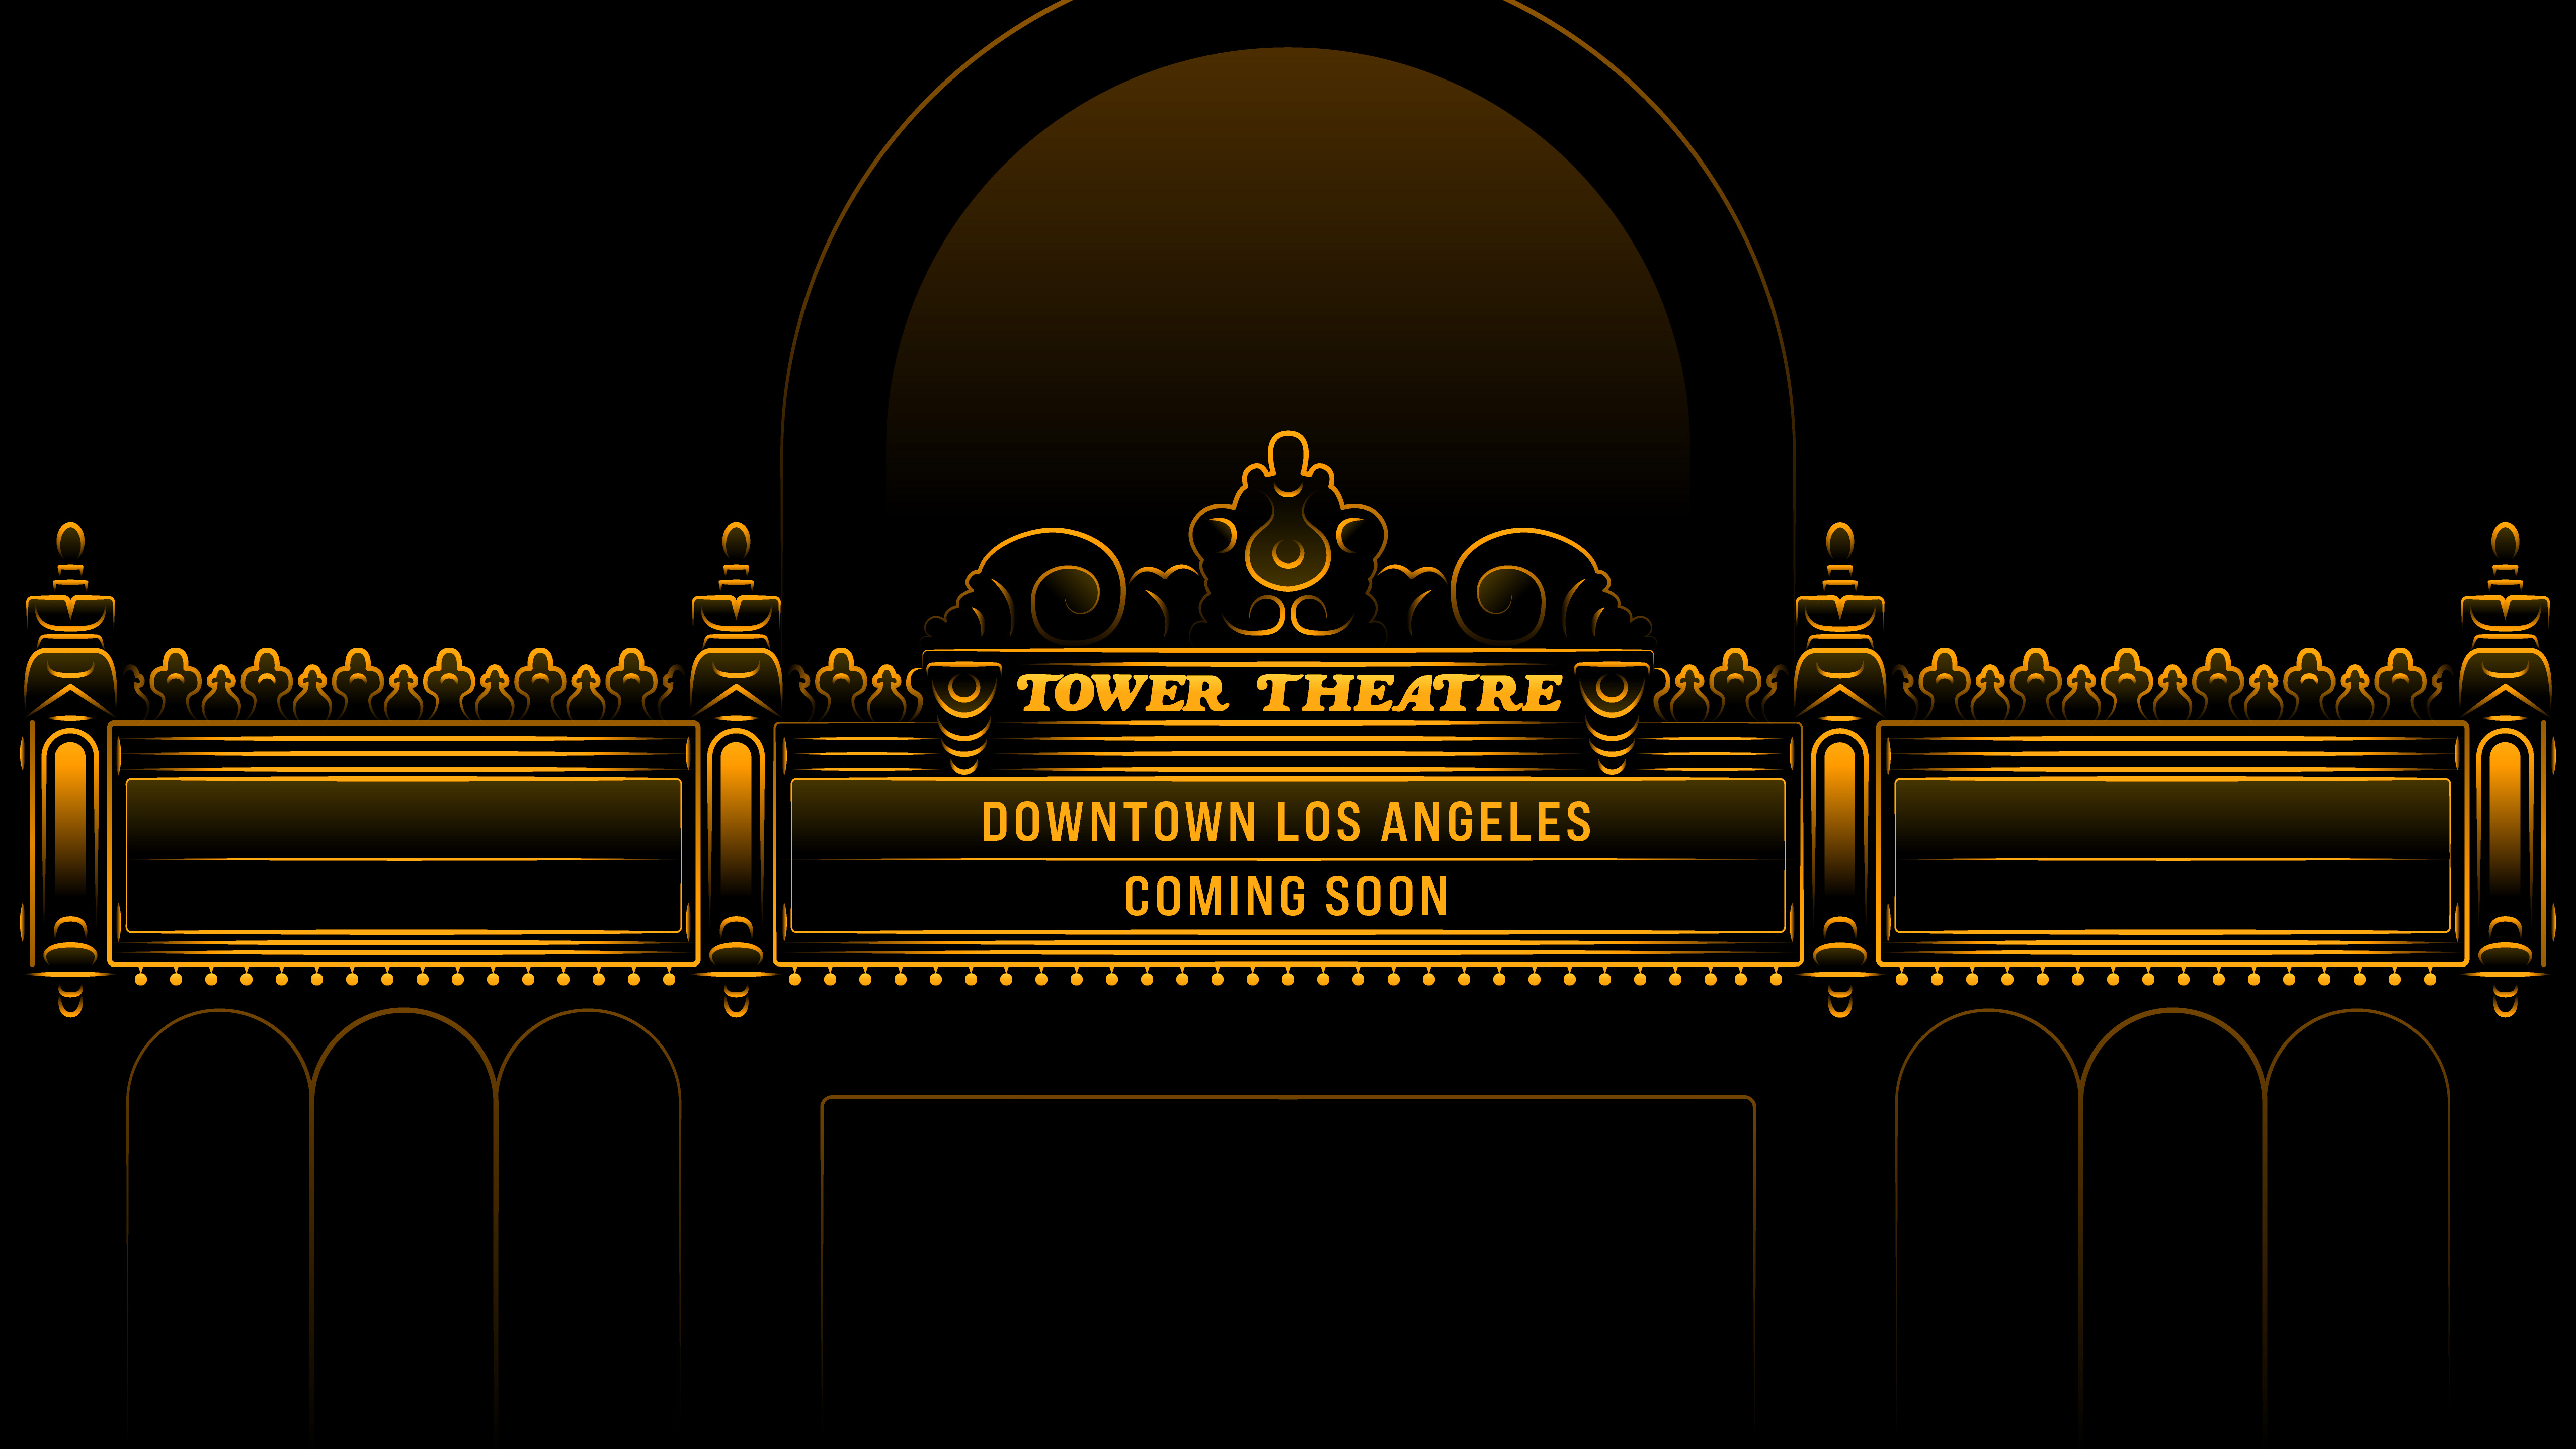 Apple Tower Theatre Marquee with text "Downtown Los Angeles Coming Soon"